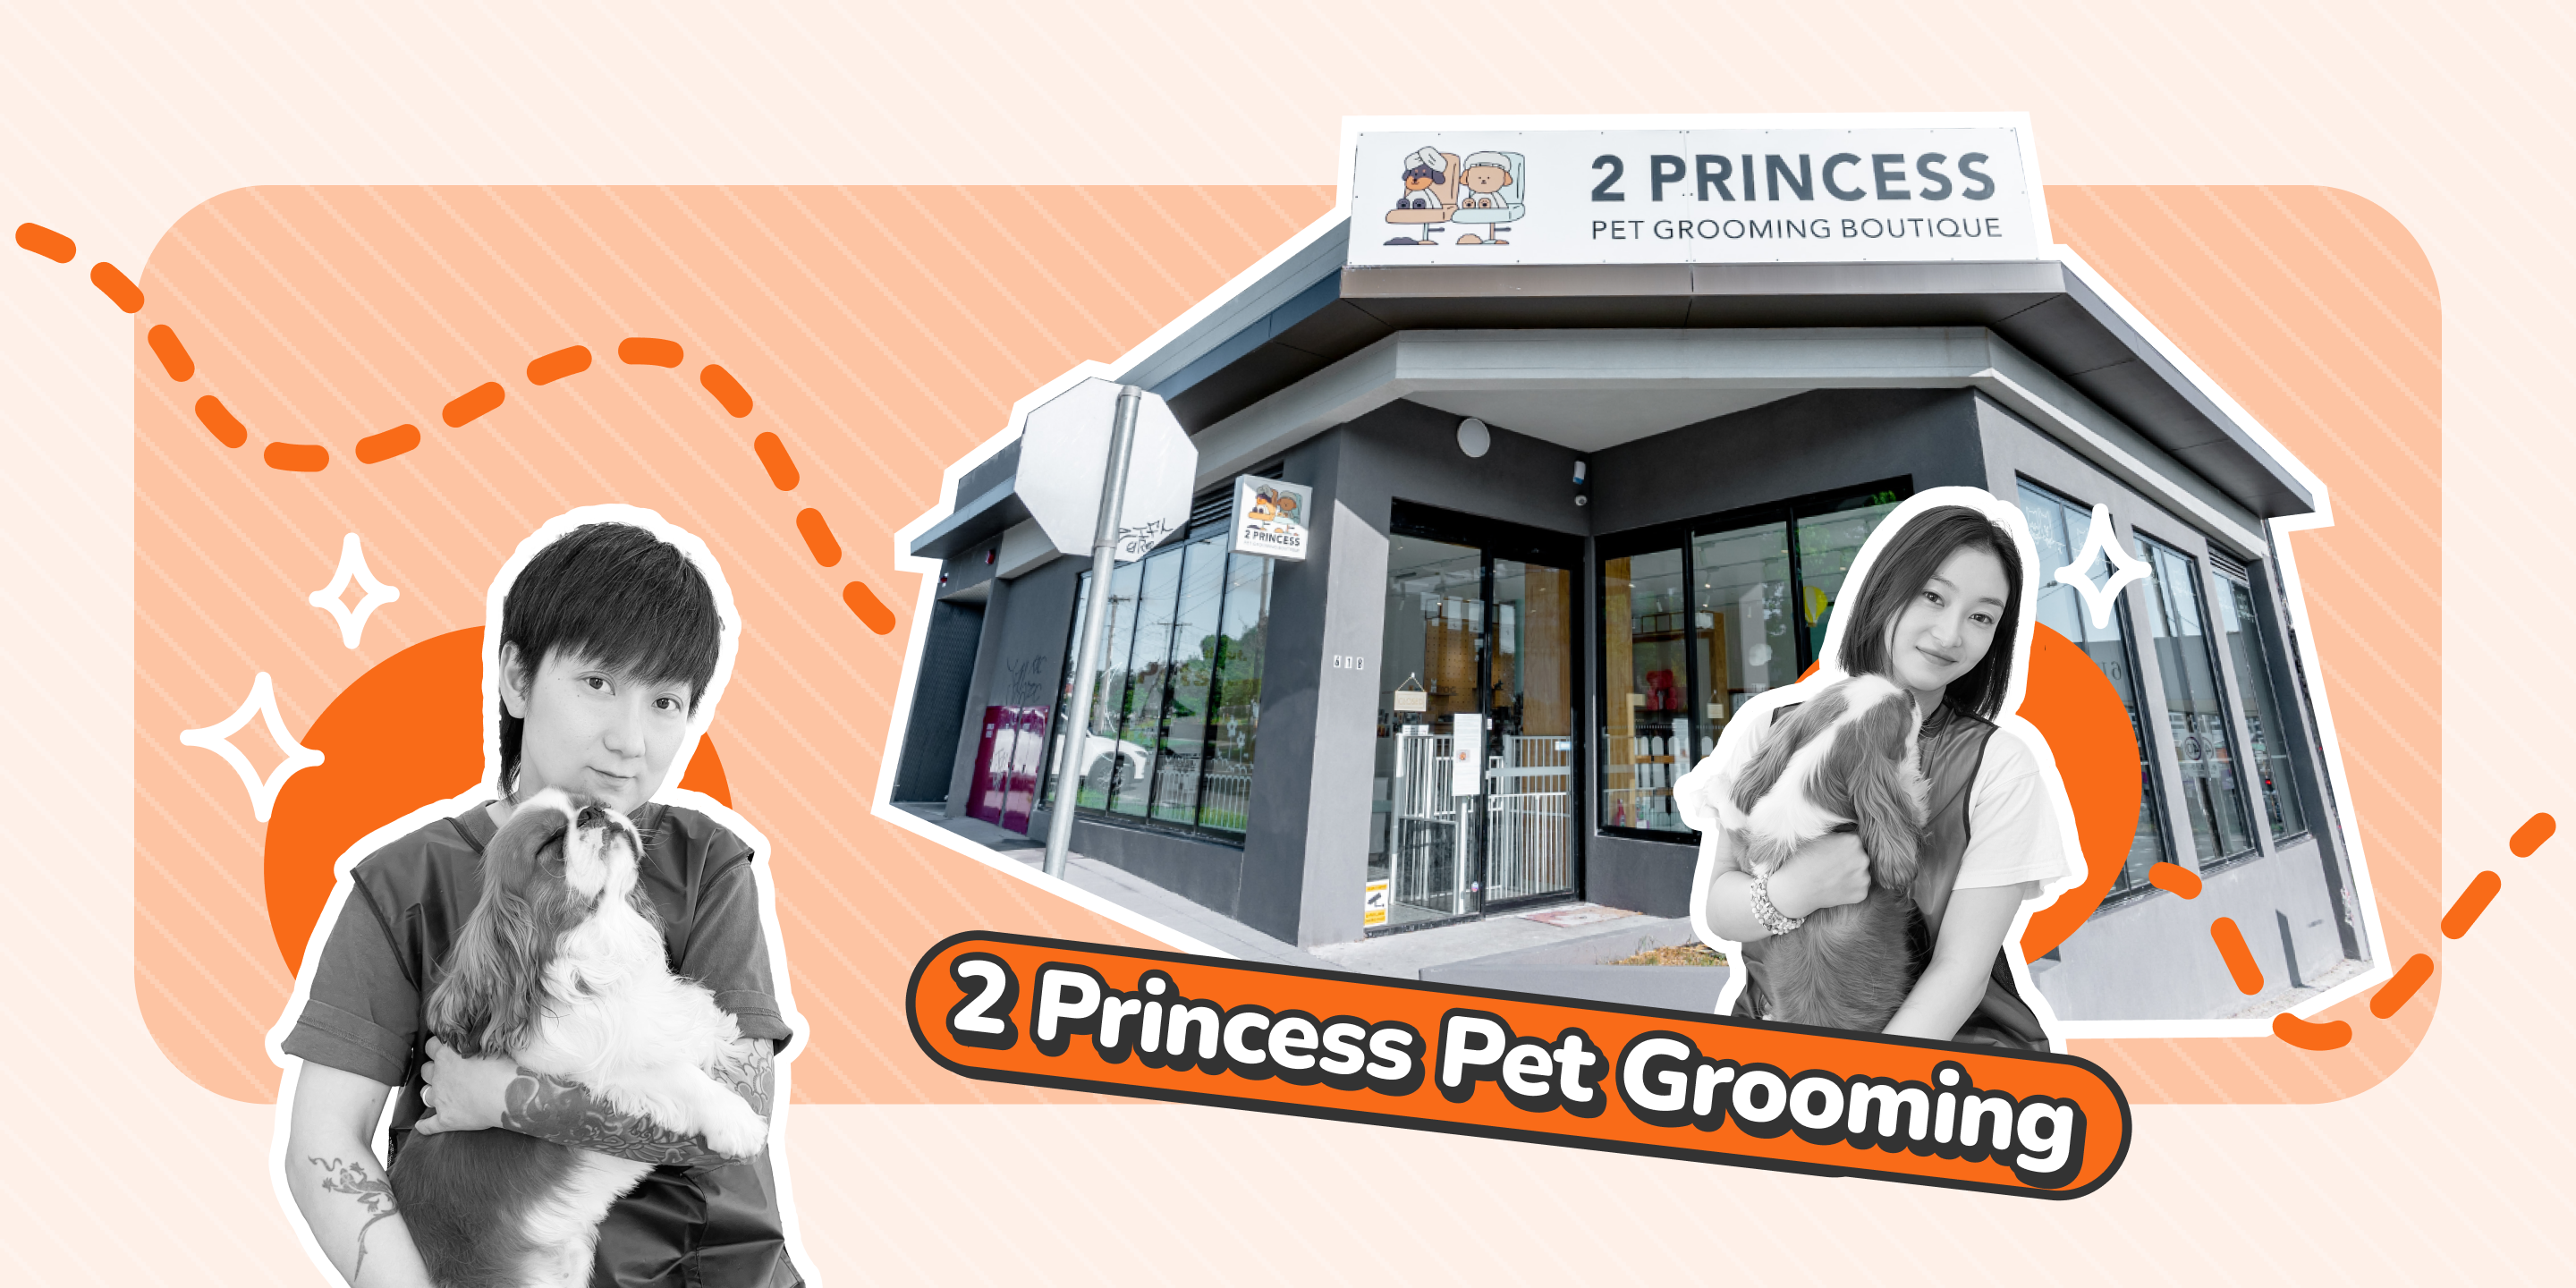 How 2 Princess Pet Grooming Expands into Daycare to Deliver an Even Better Customer Experience